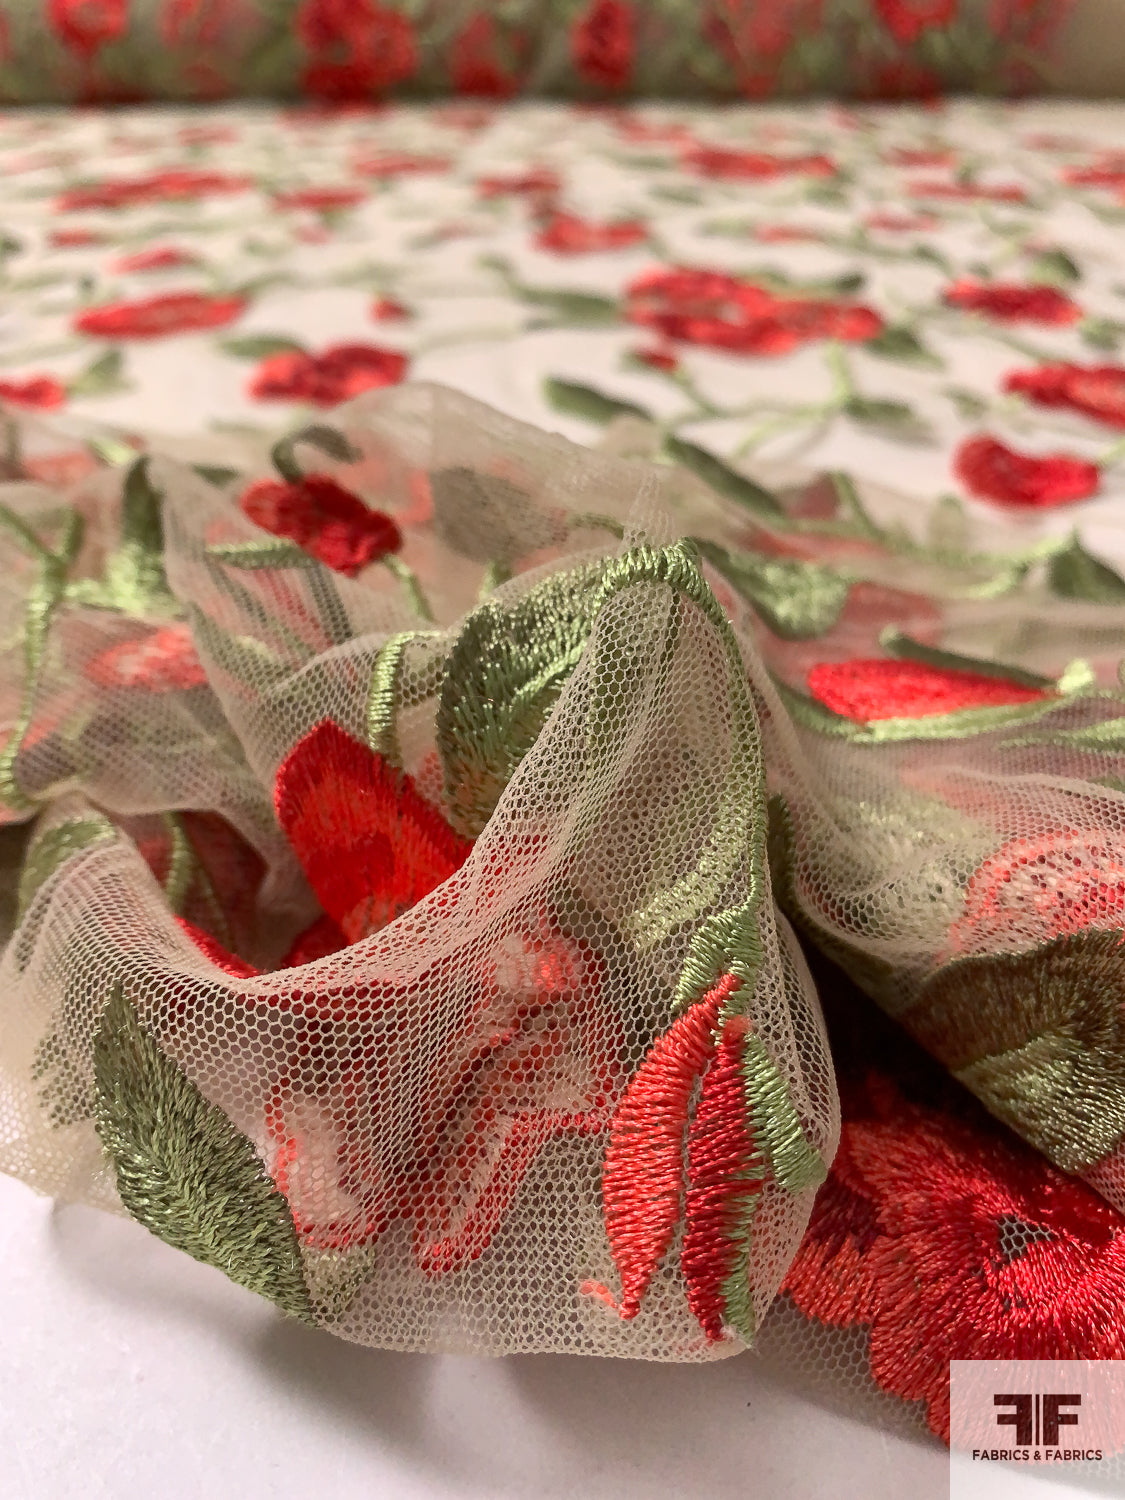 Floral Embroidered Tulle - Red/Pickle Green/Nude